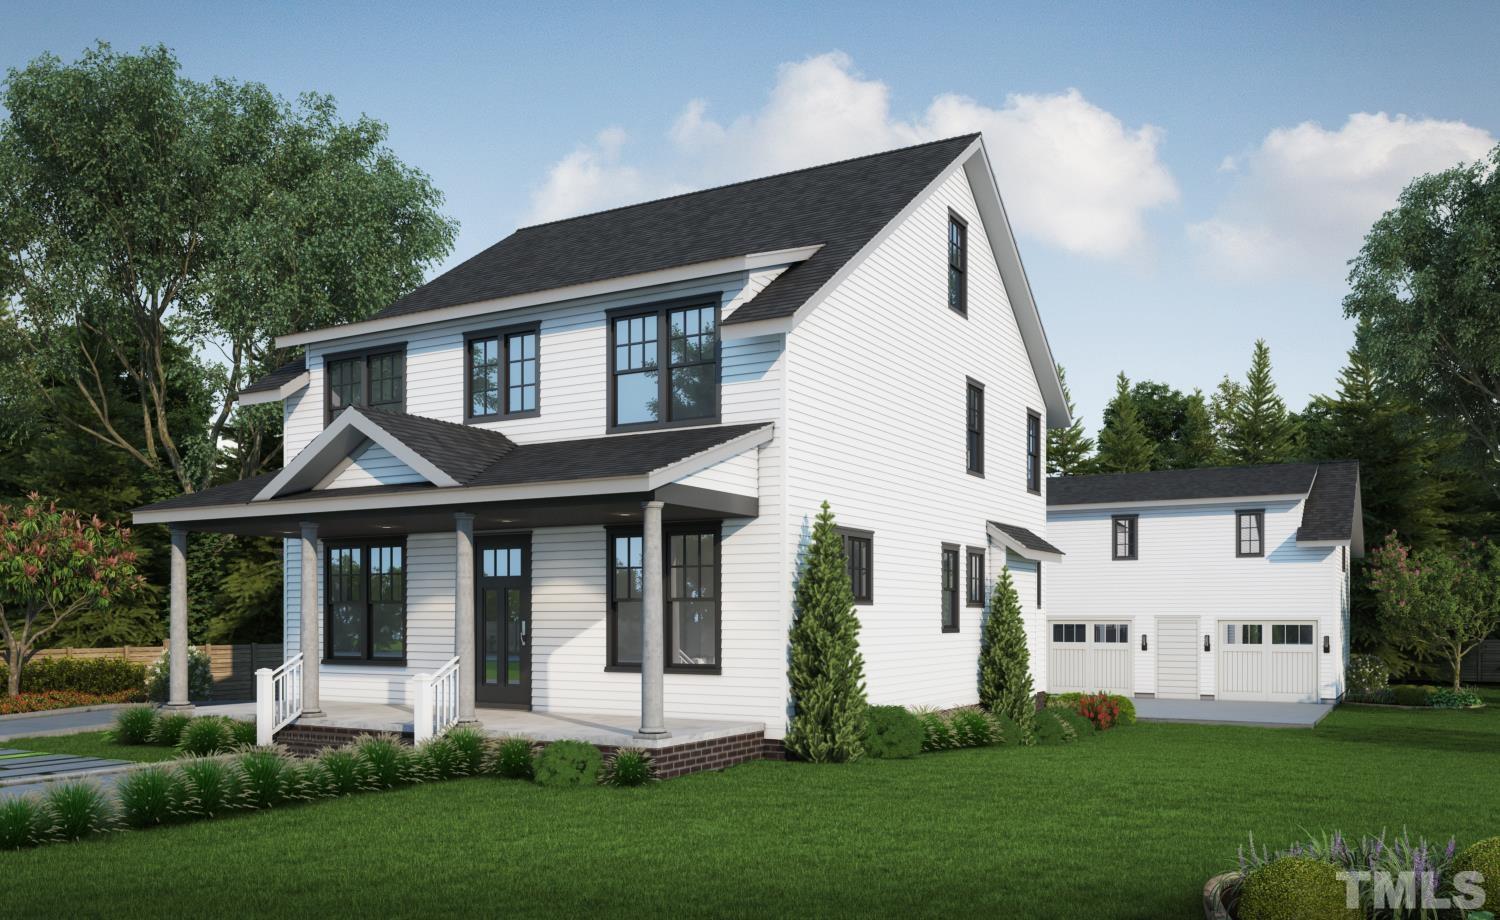 Welcome home! note that garage shown in rendering is optional upgrade, not included in price.